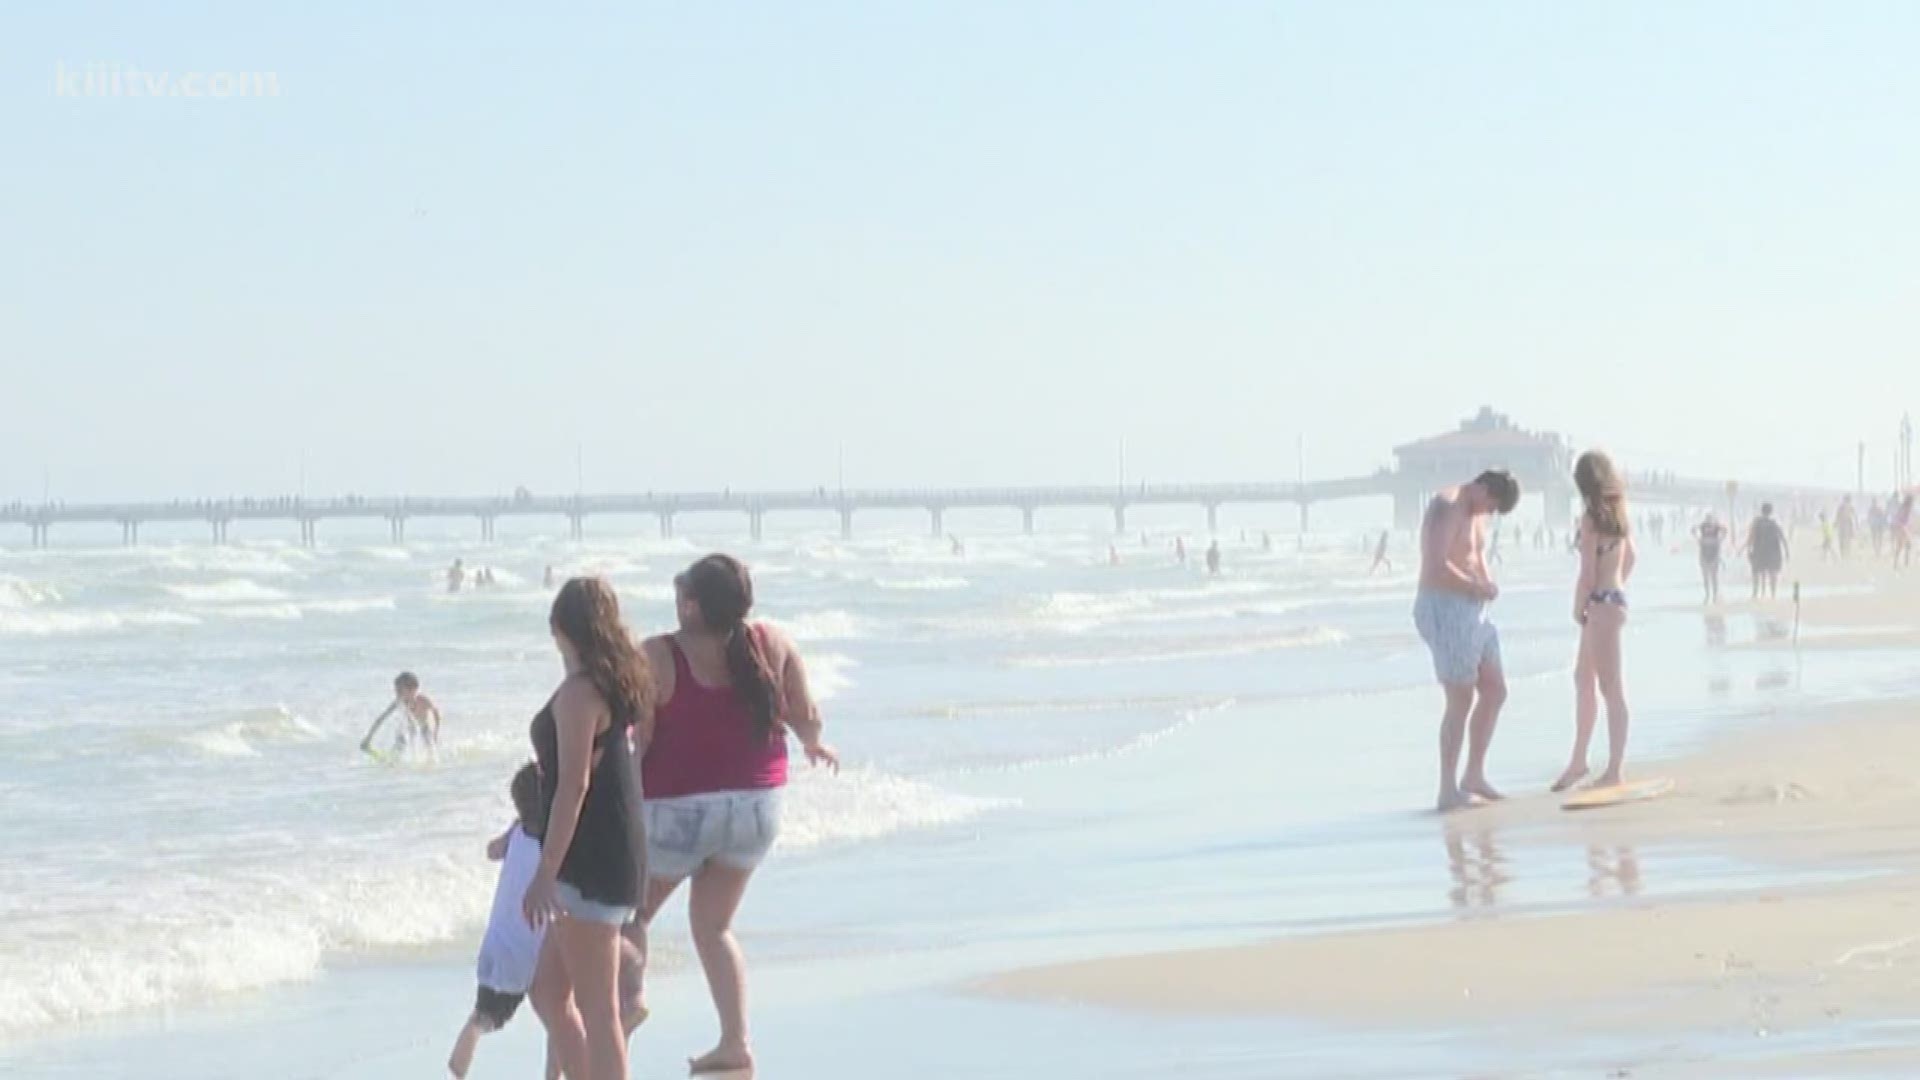 Dr. Vijay Bindingnavele shares several beach safety tips to keep in mind this summer.